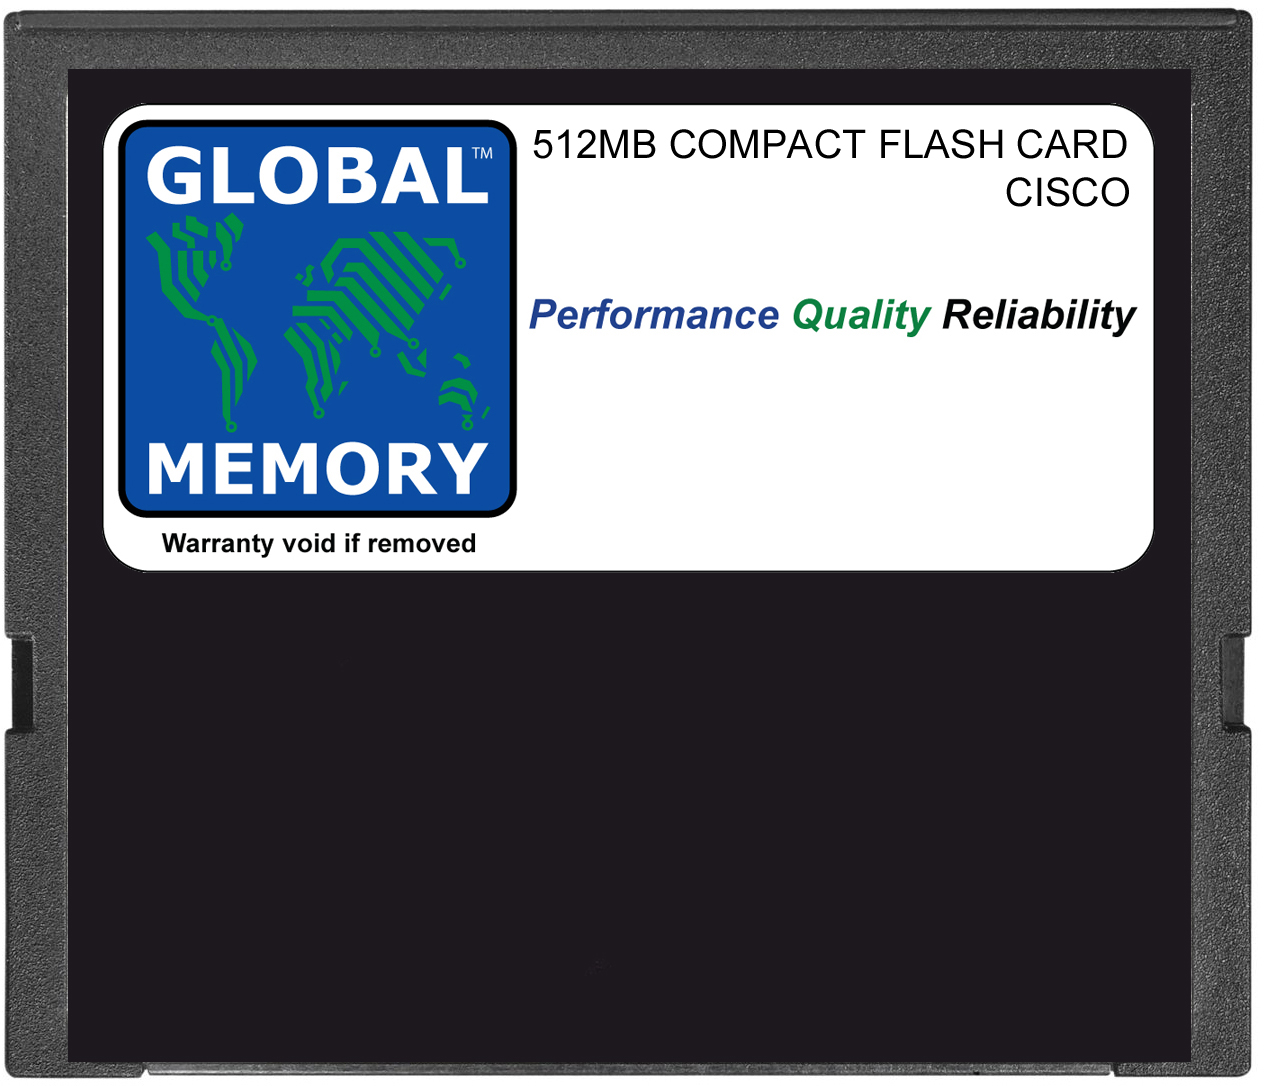 512MB COMPACT FLASH CARD MEMORY FOR CISCO 10000 SERIES ROUTERS PRE-3 PERFORMANCE ROUTING ENGINE (MEM-10K-CPTFL512M)